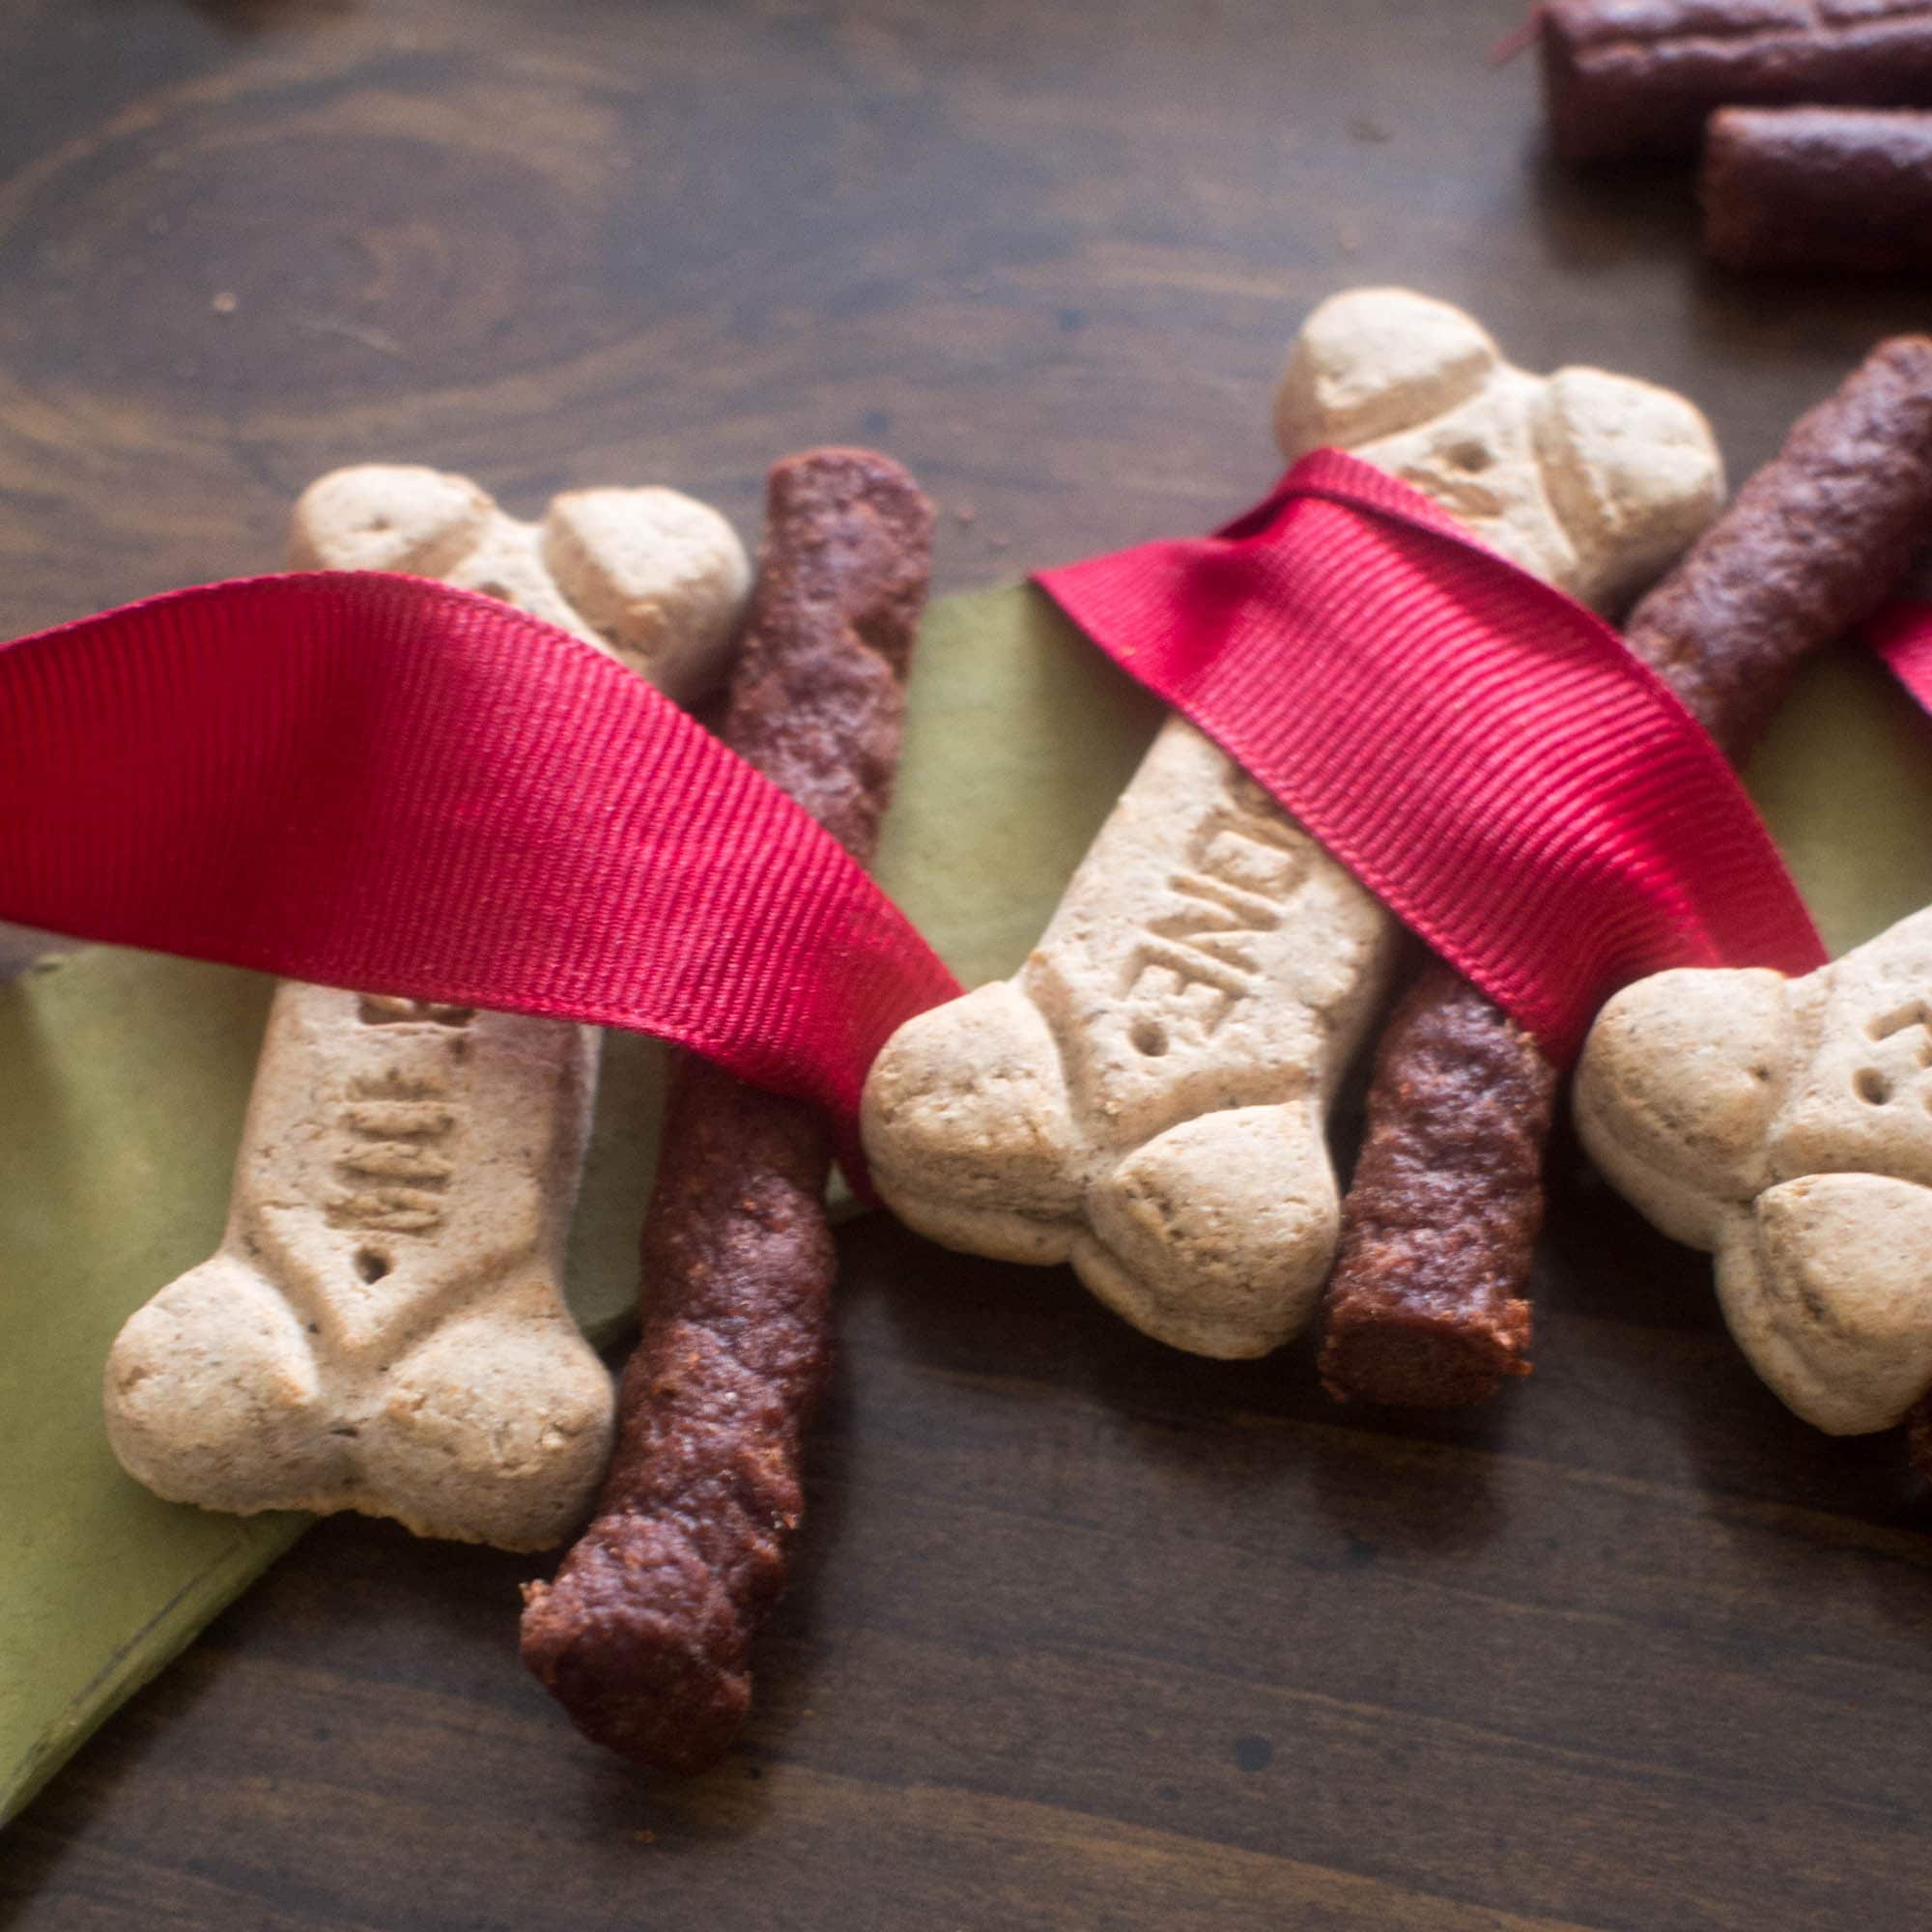 Dog treats with ribbons and bows on a table.